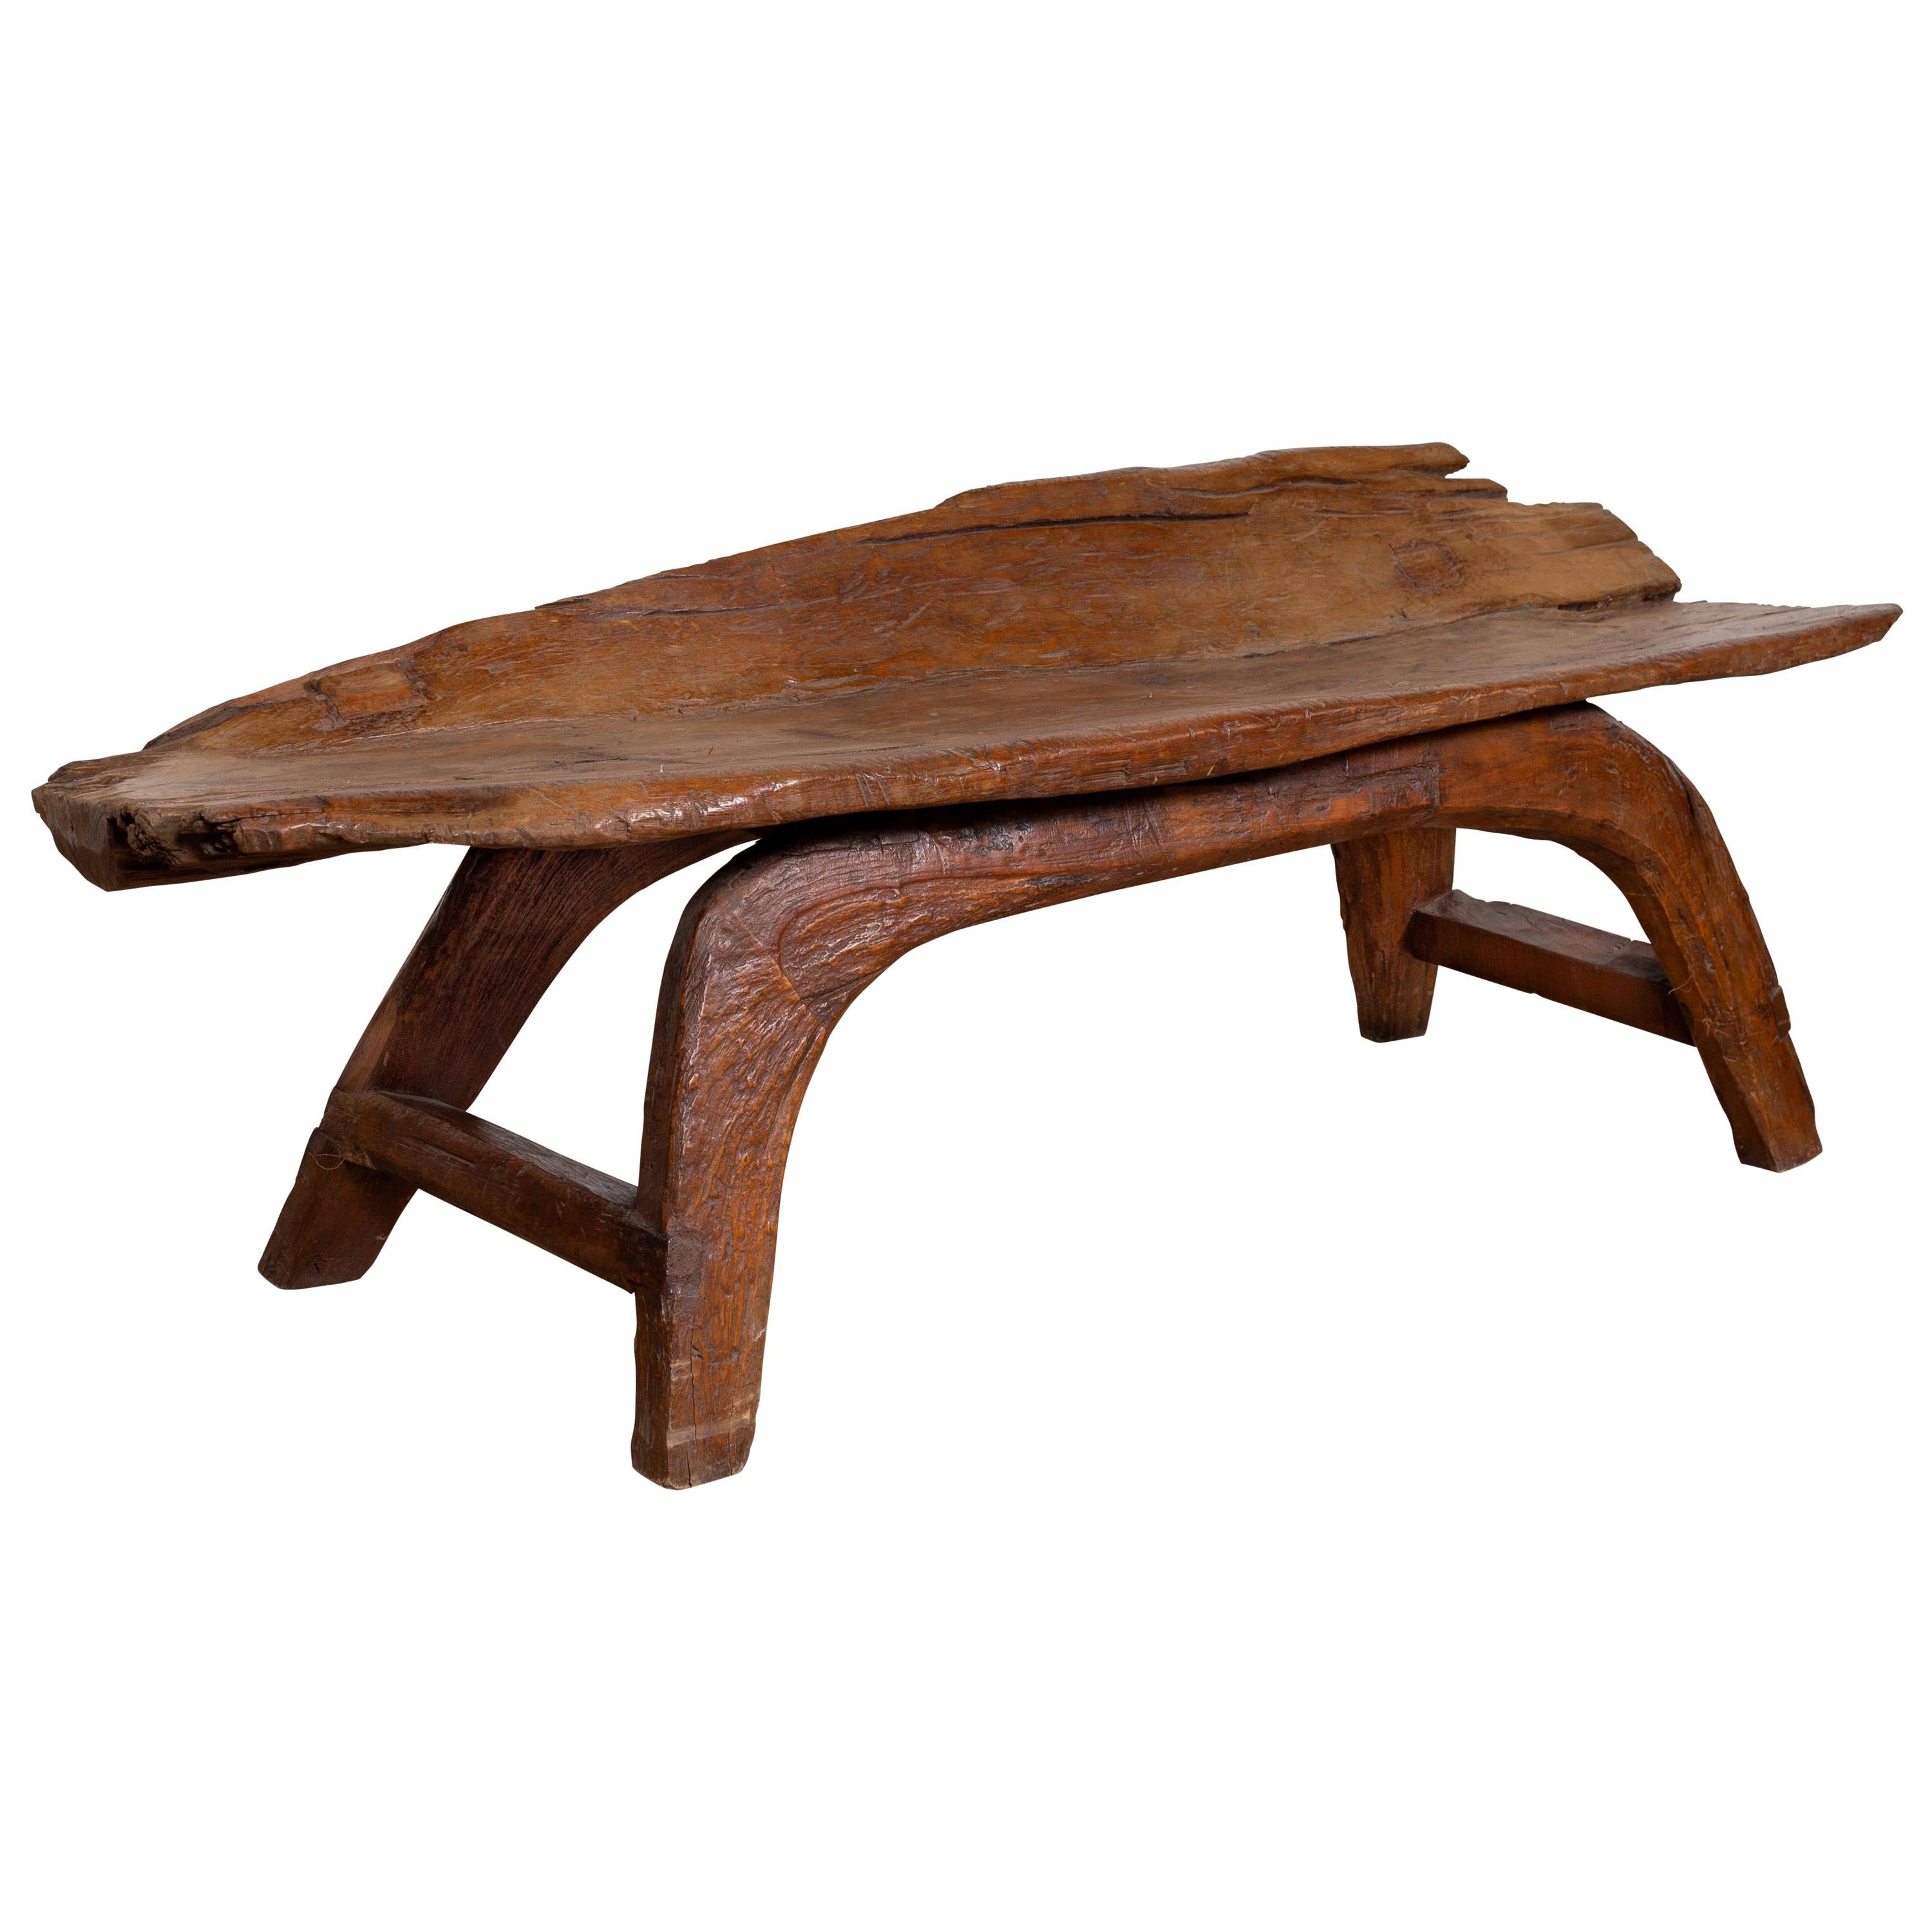 Freeform Design Antique Wooden Bench from the Riverbed of Bali with Arching Base